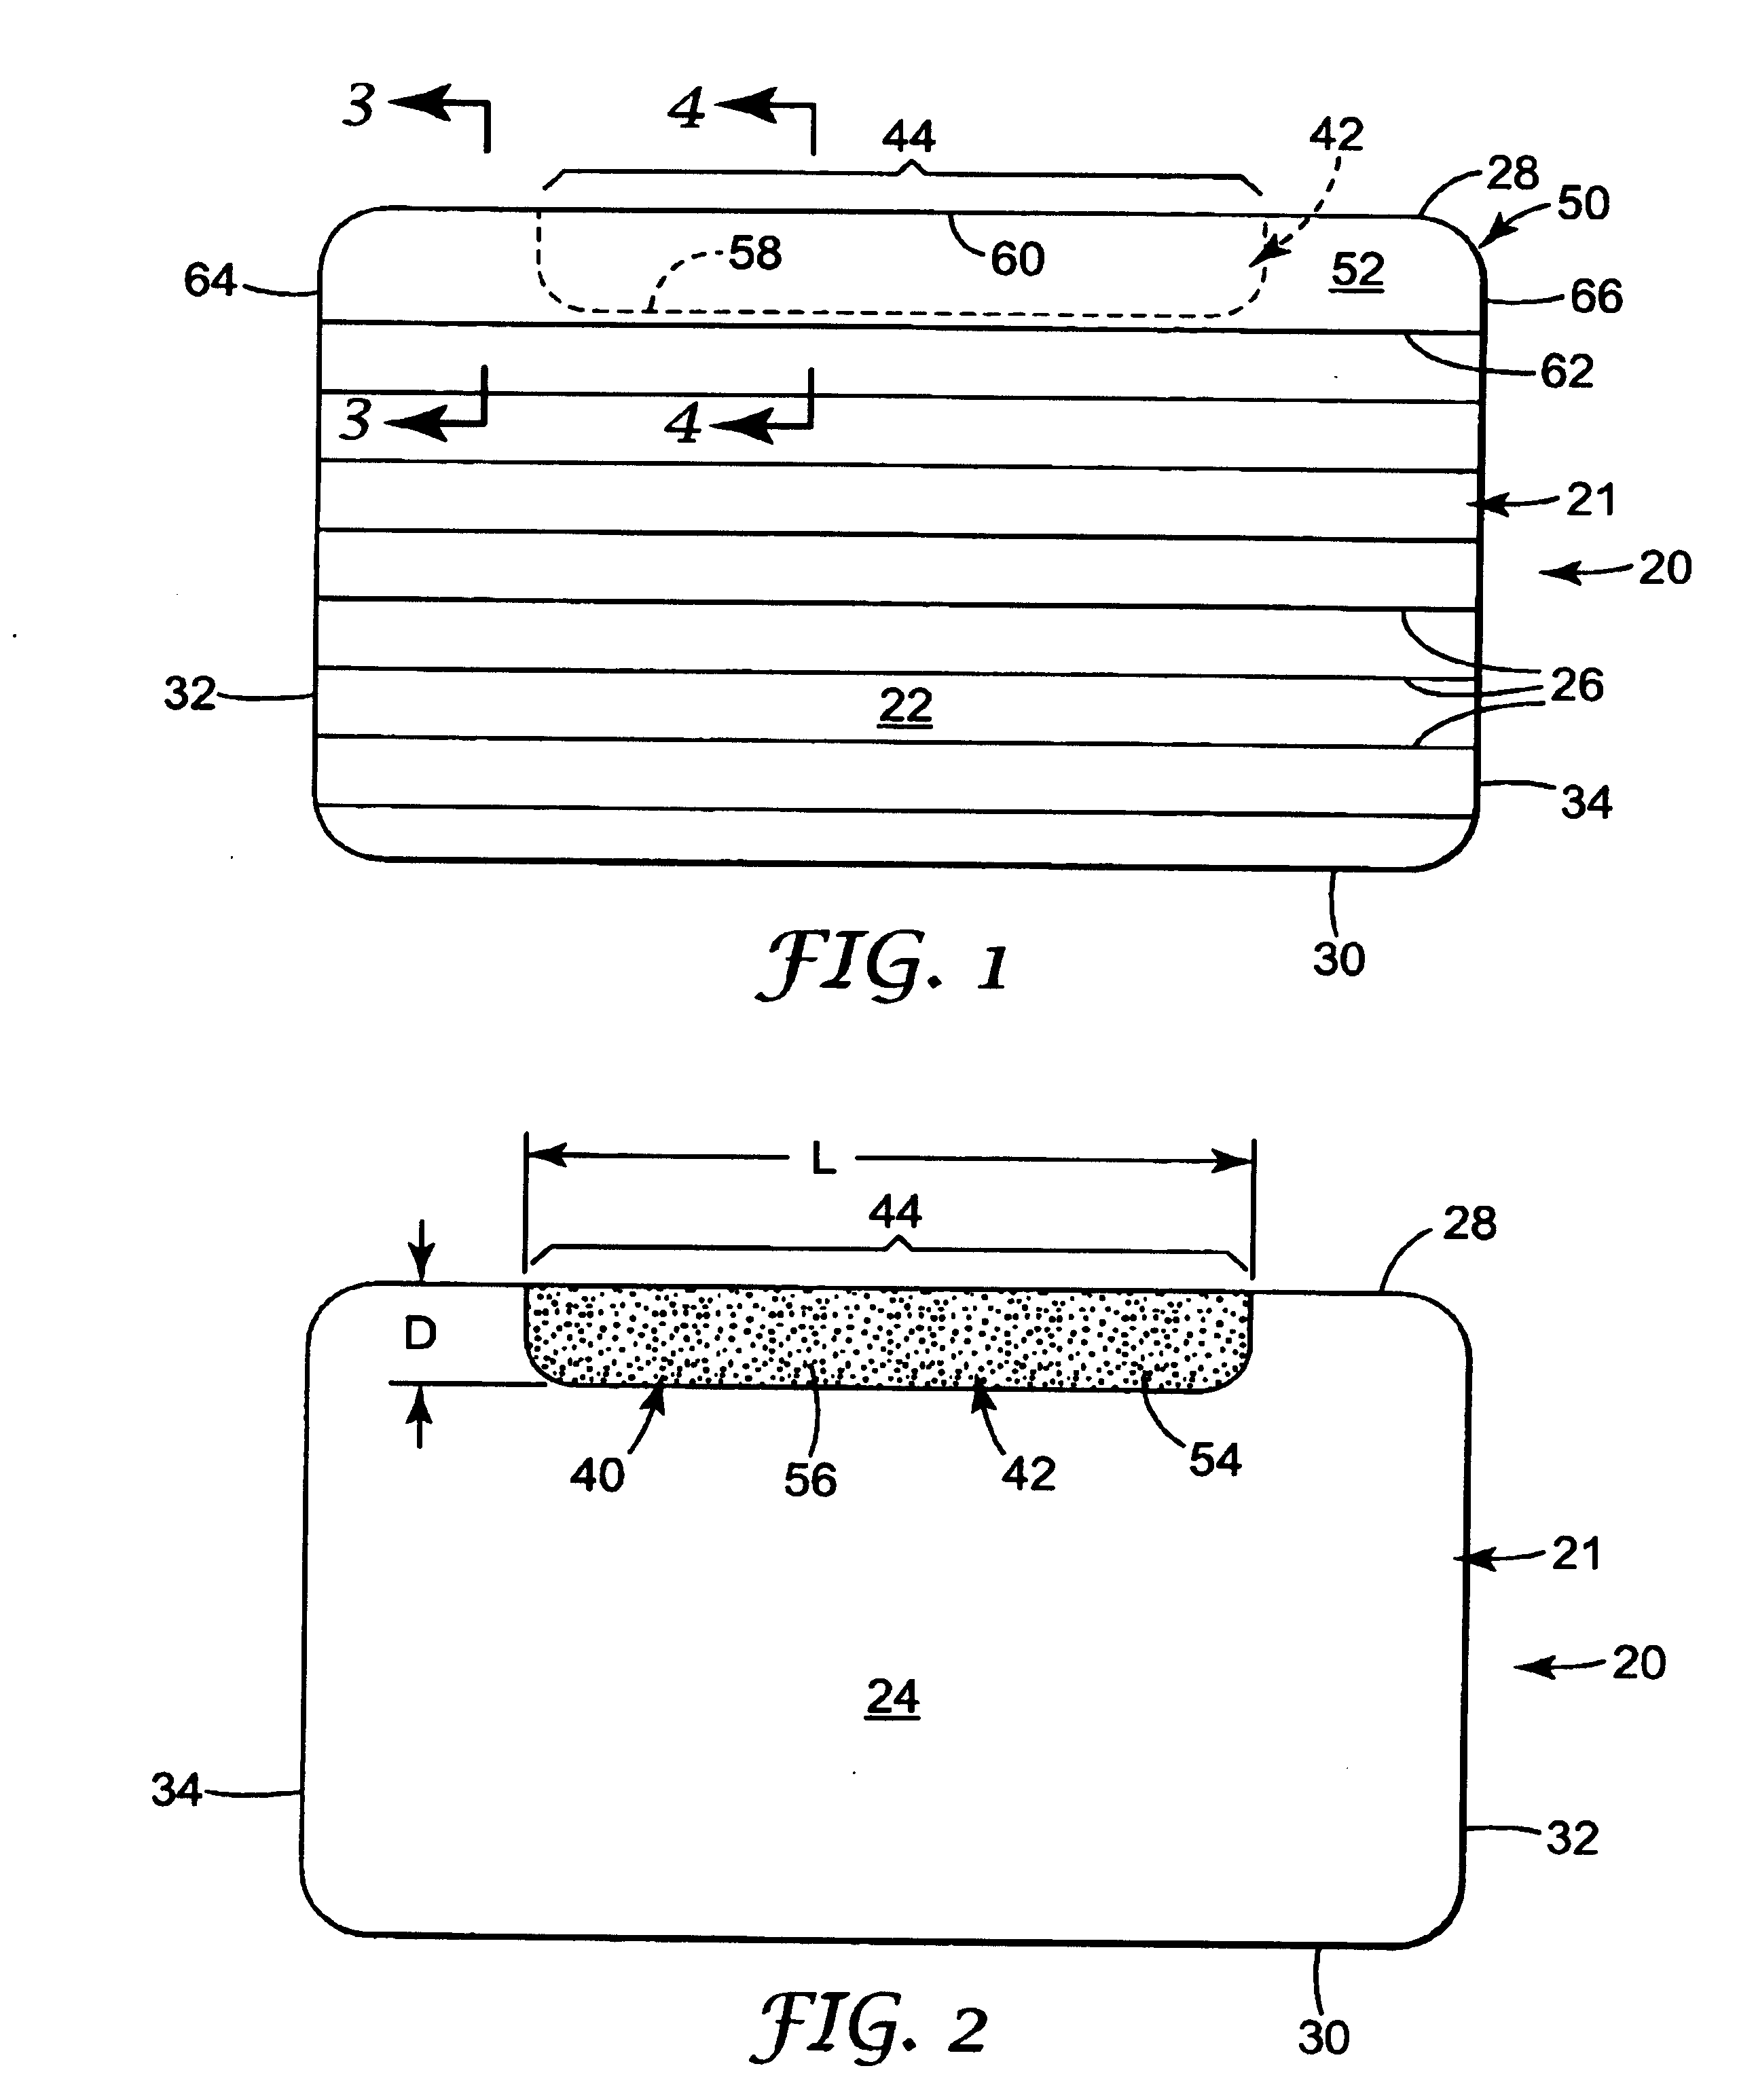 Article with selectively activated adhesive